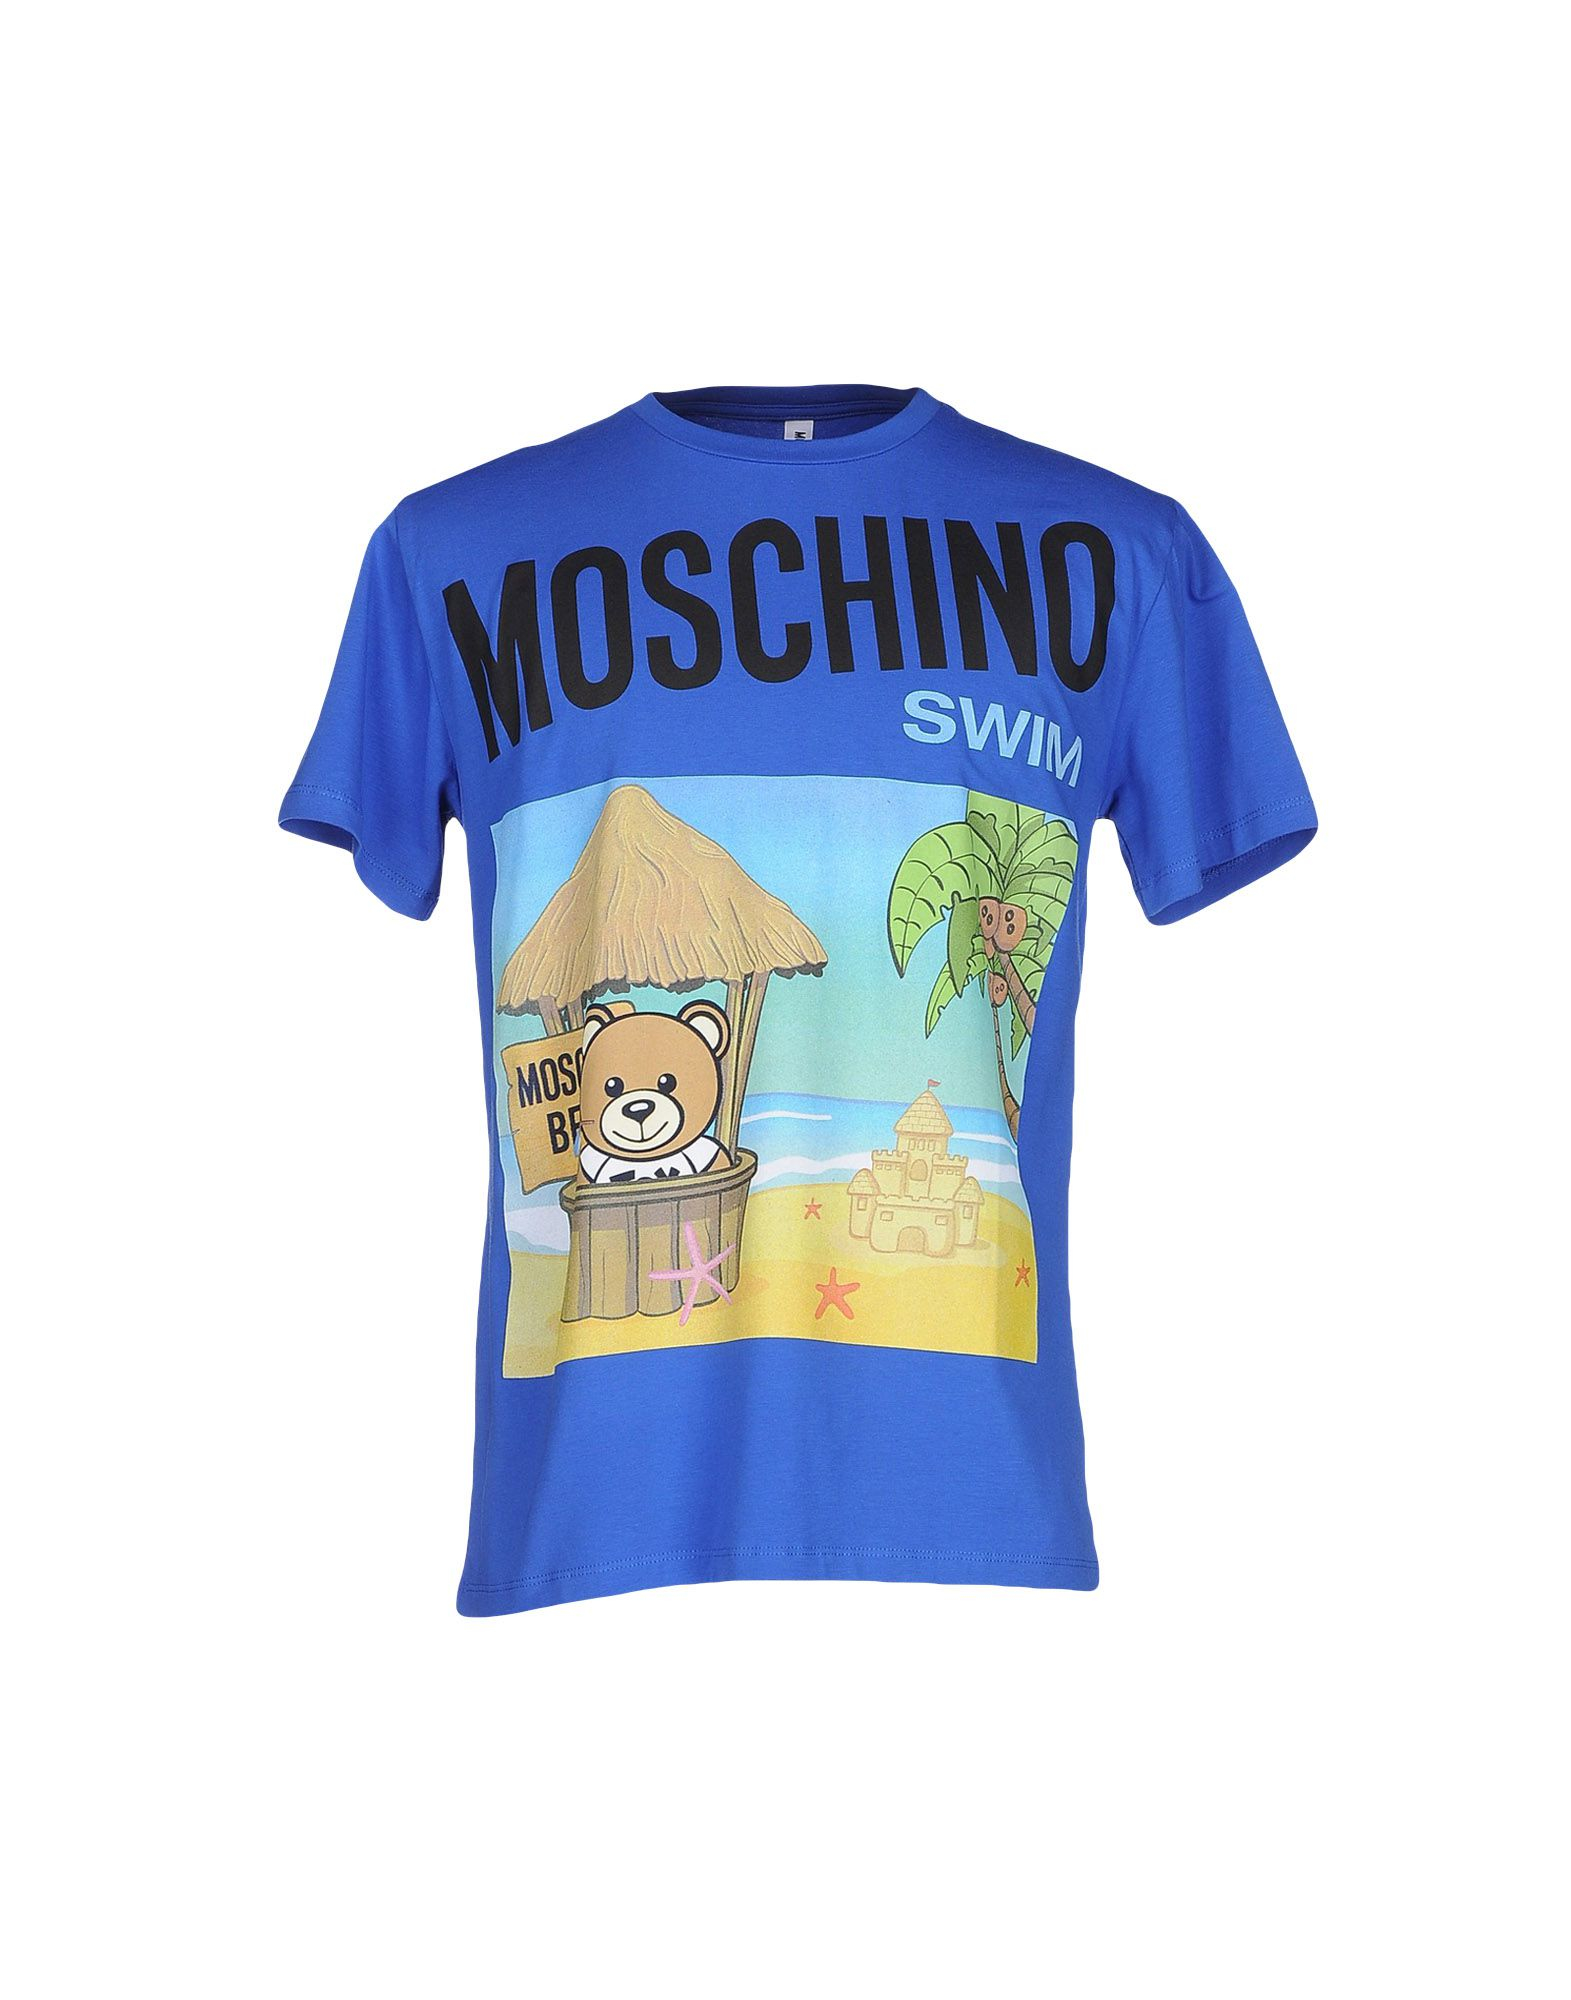 Lyst - Moschino T-shirt in Blue for Men